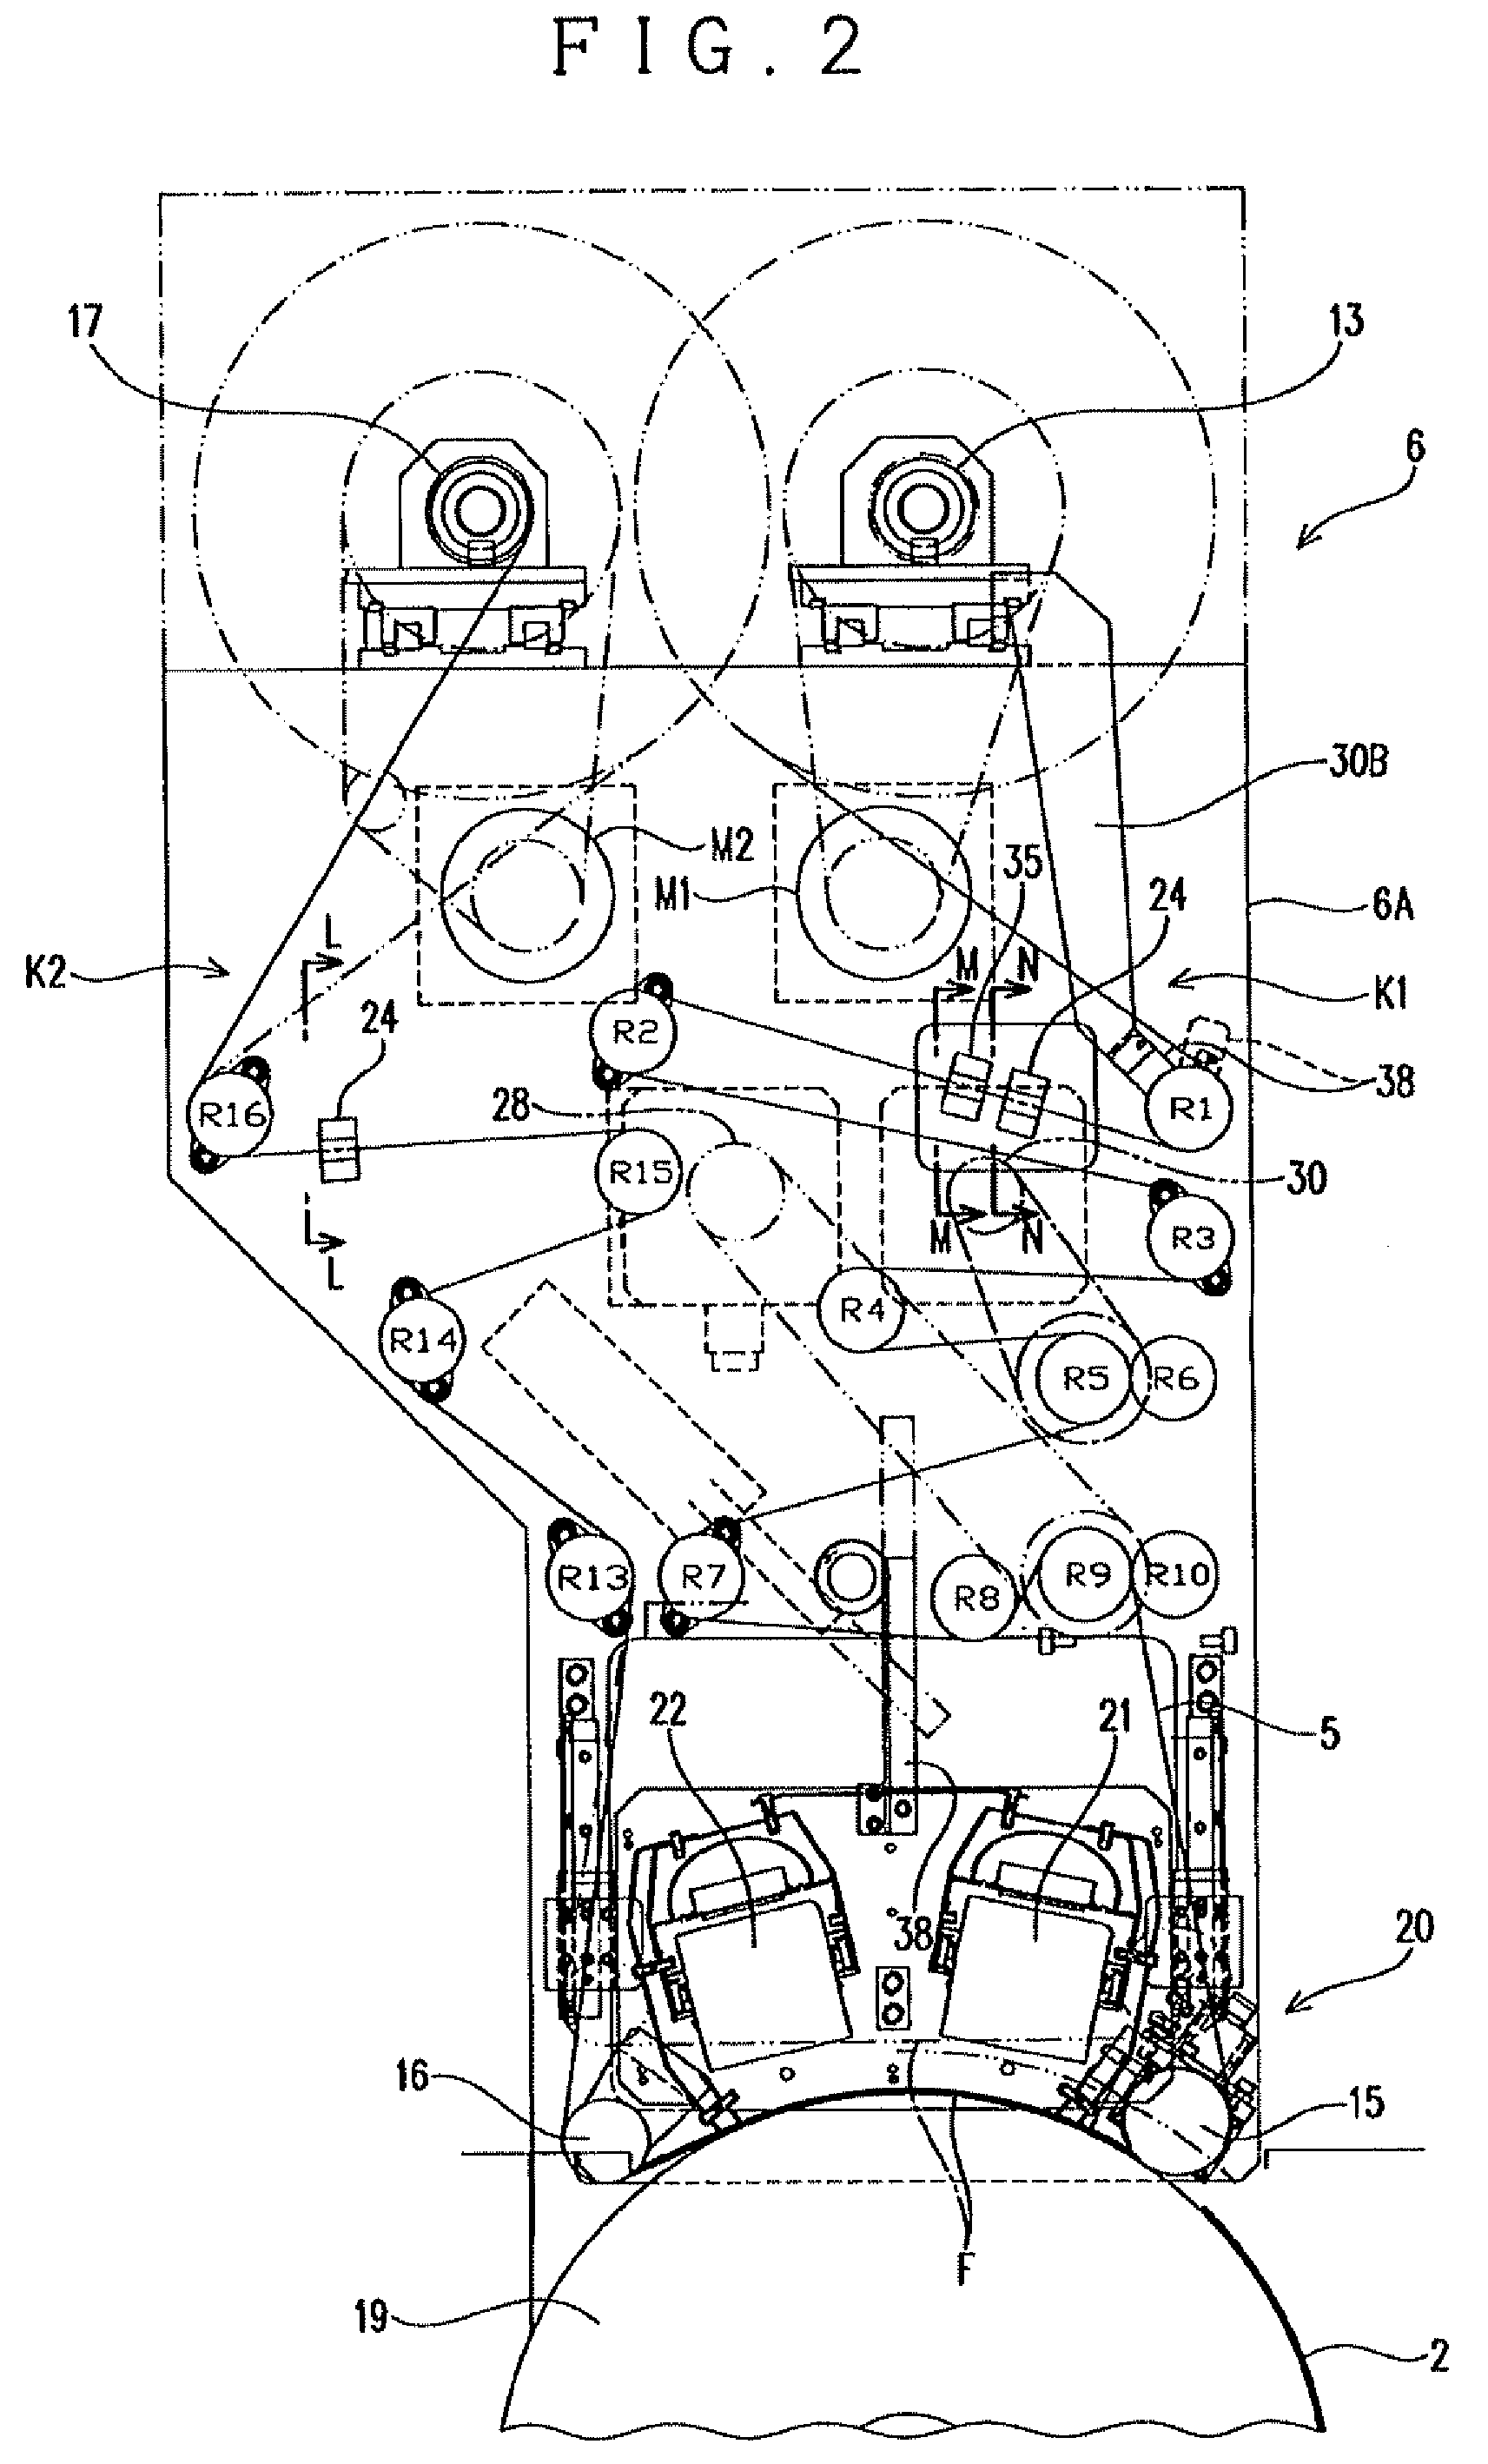 Method of Winding Up Transfer Film and Device for Performing Transfer Printing on Printed Sheets of Paper